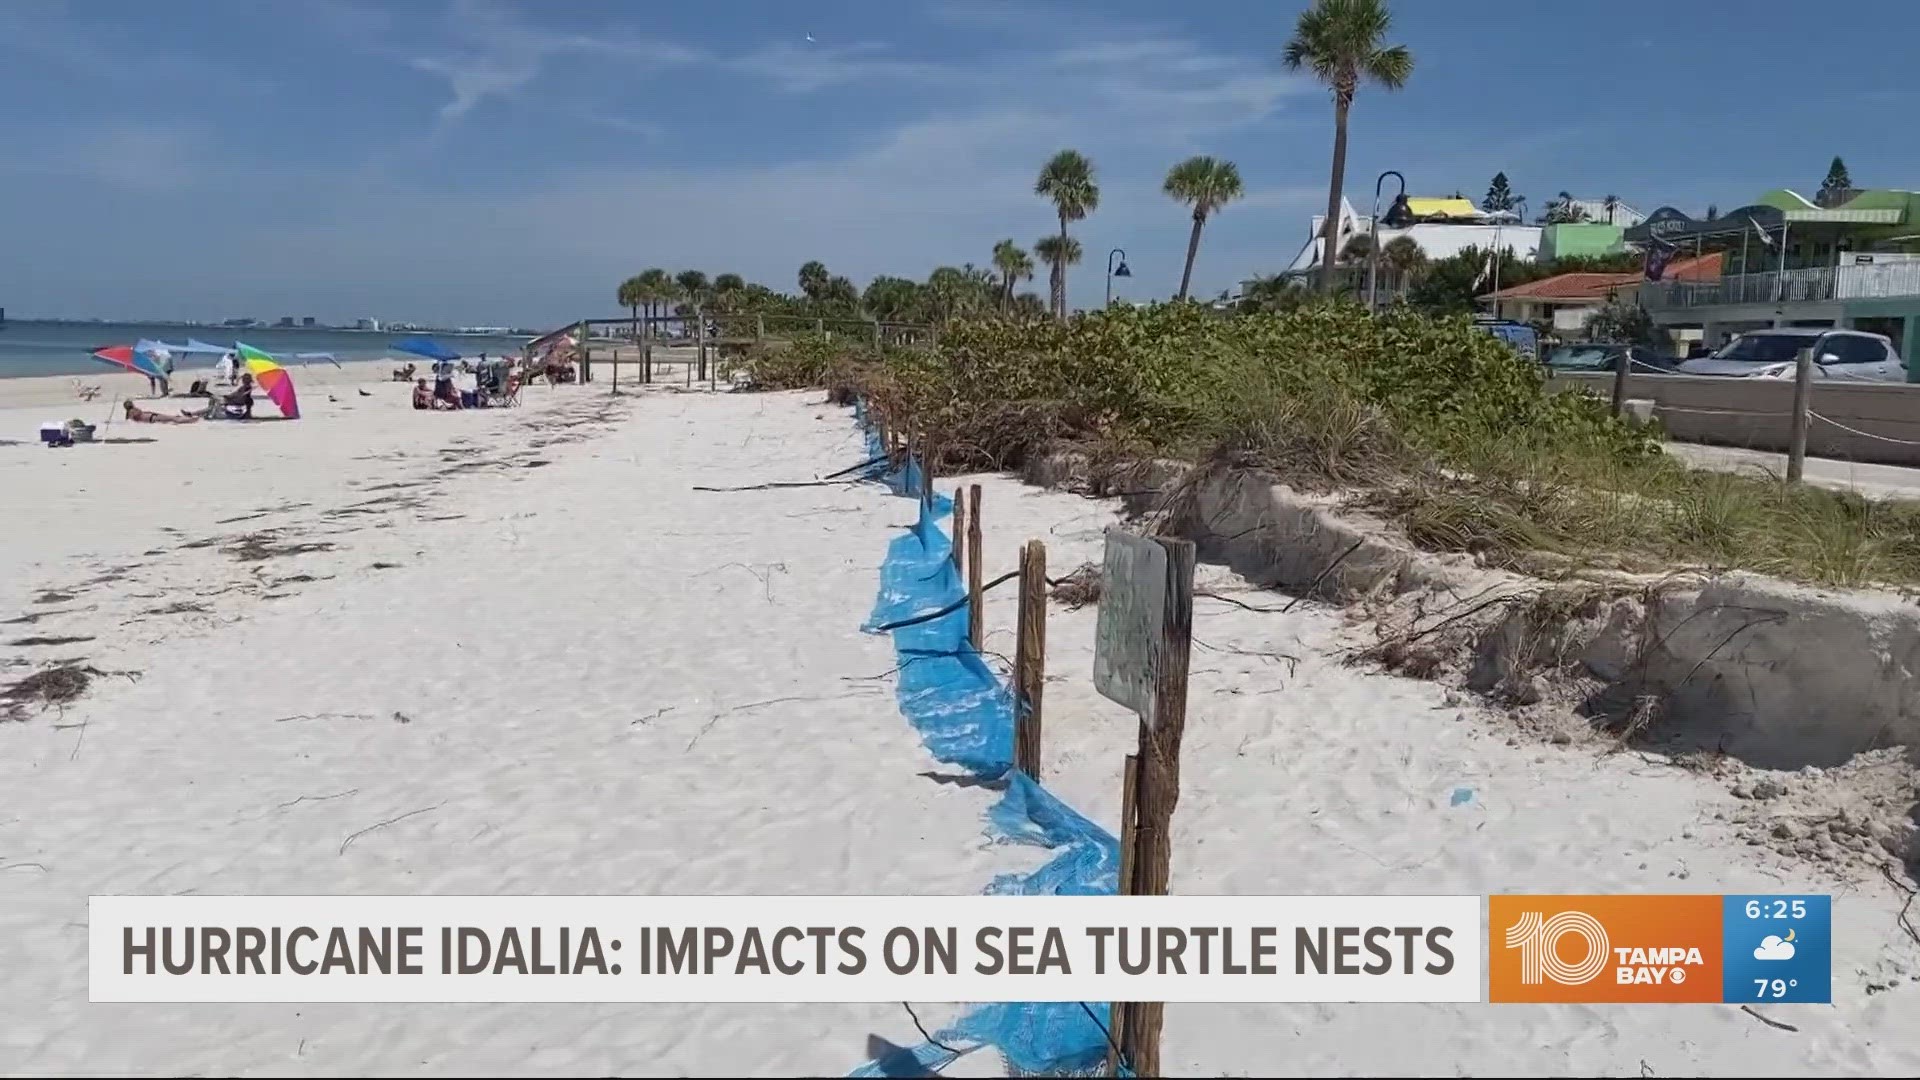 Beach erosion and hurricane impacts have caused some nests to be lost, but there is hope.